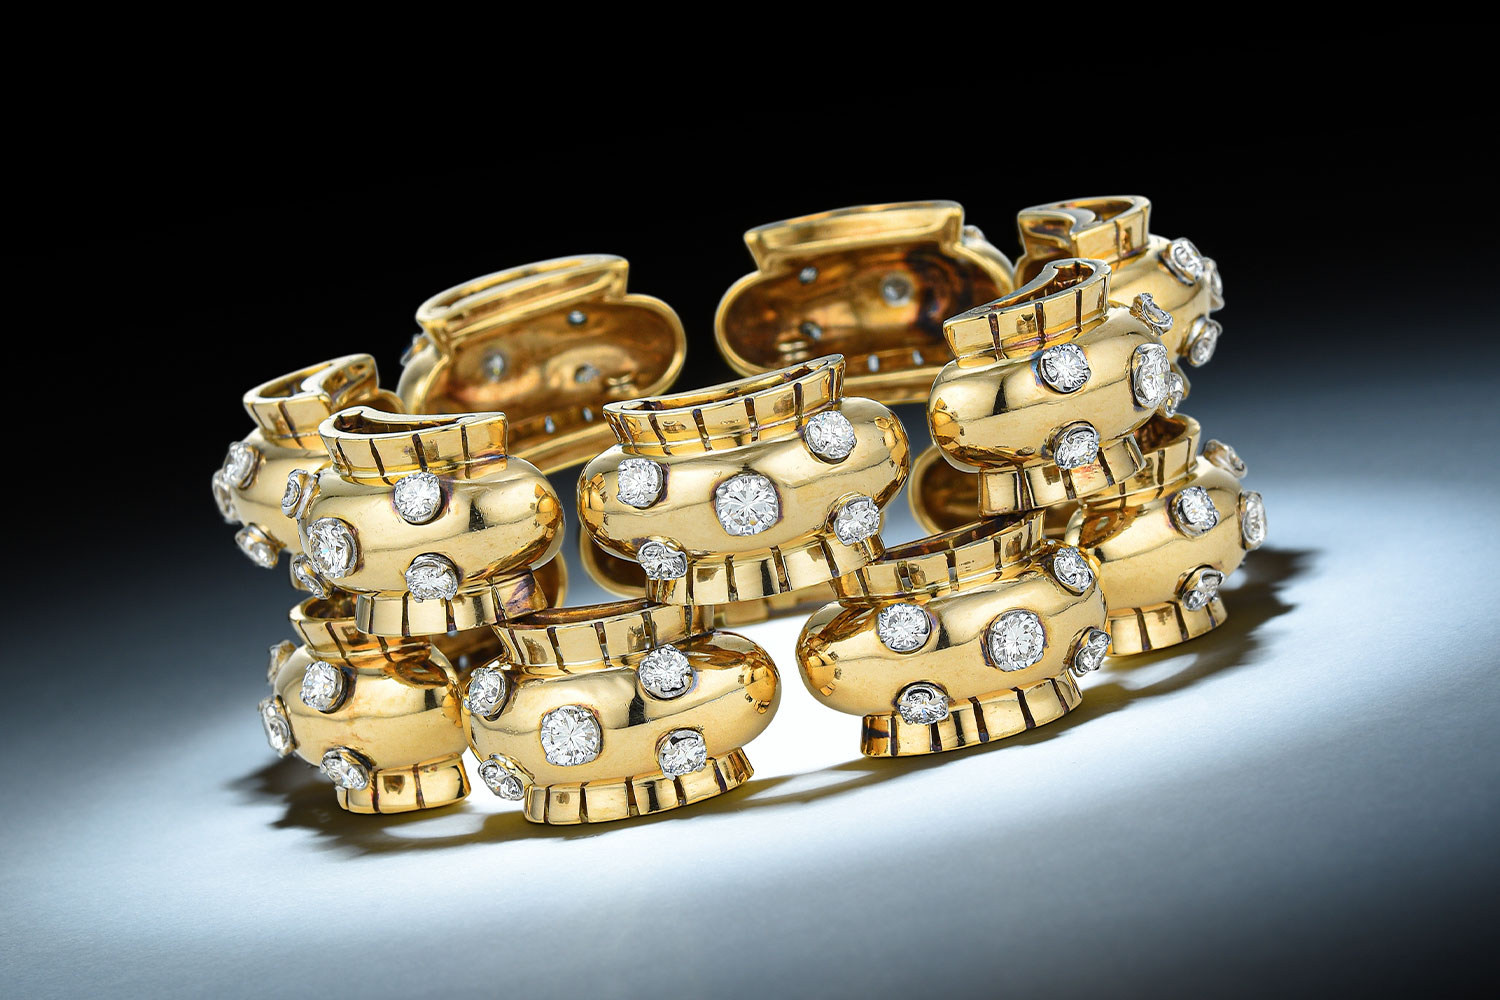 The Van Cleef & Arpels' Frivole Collection of Bracelets and Secret Watches